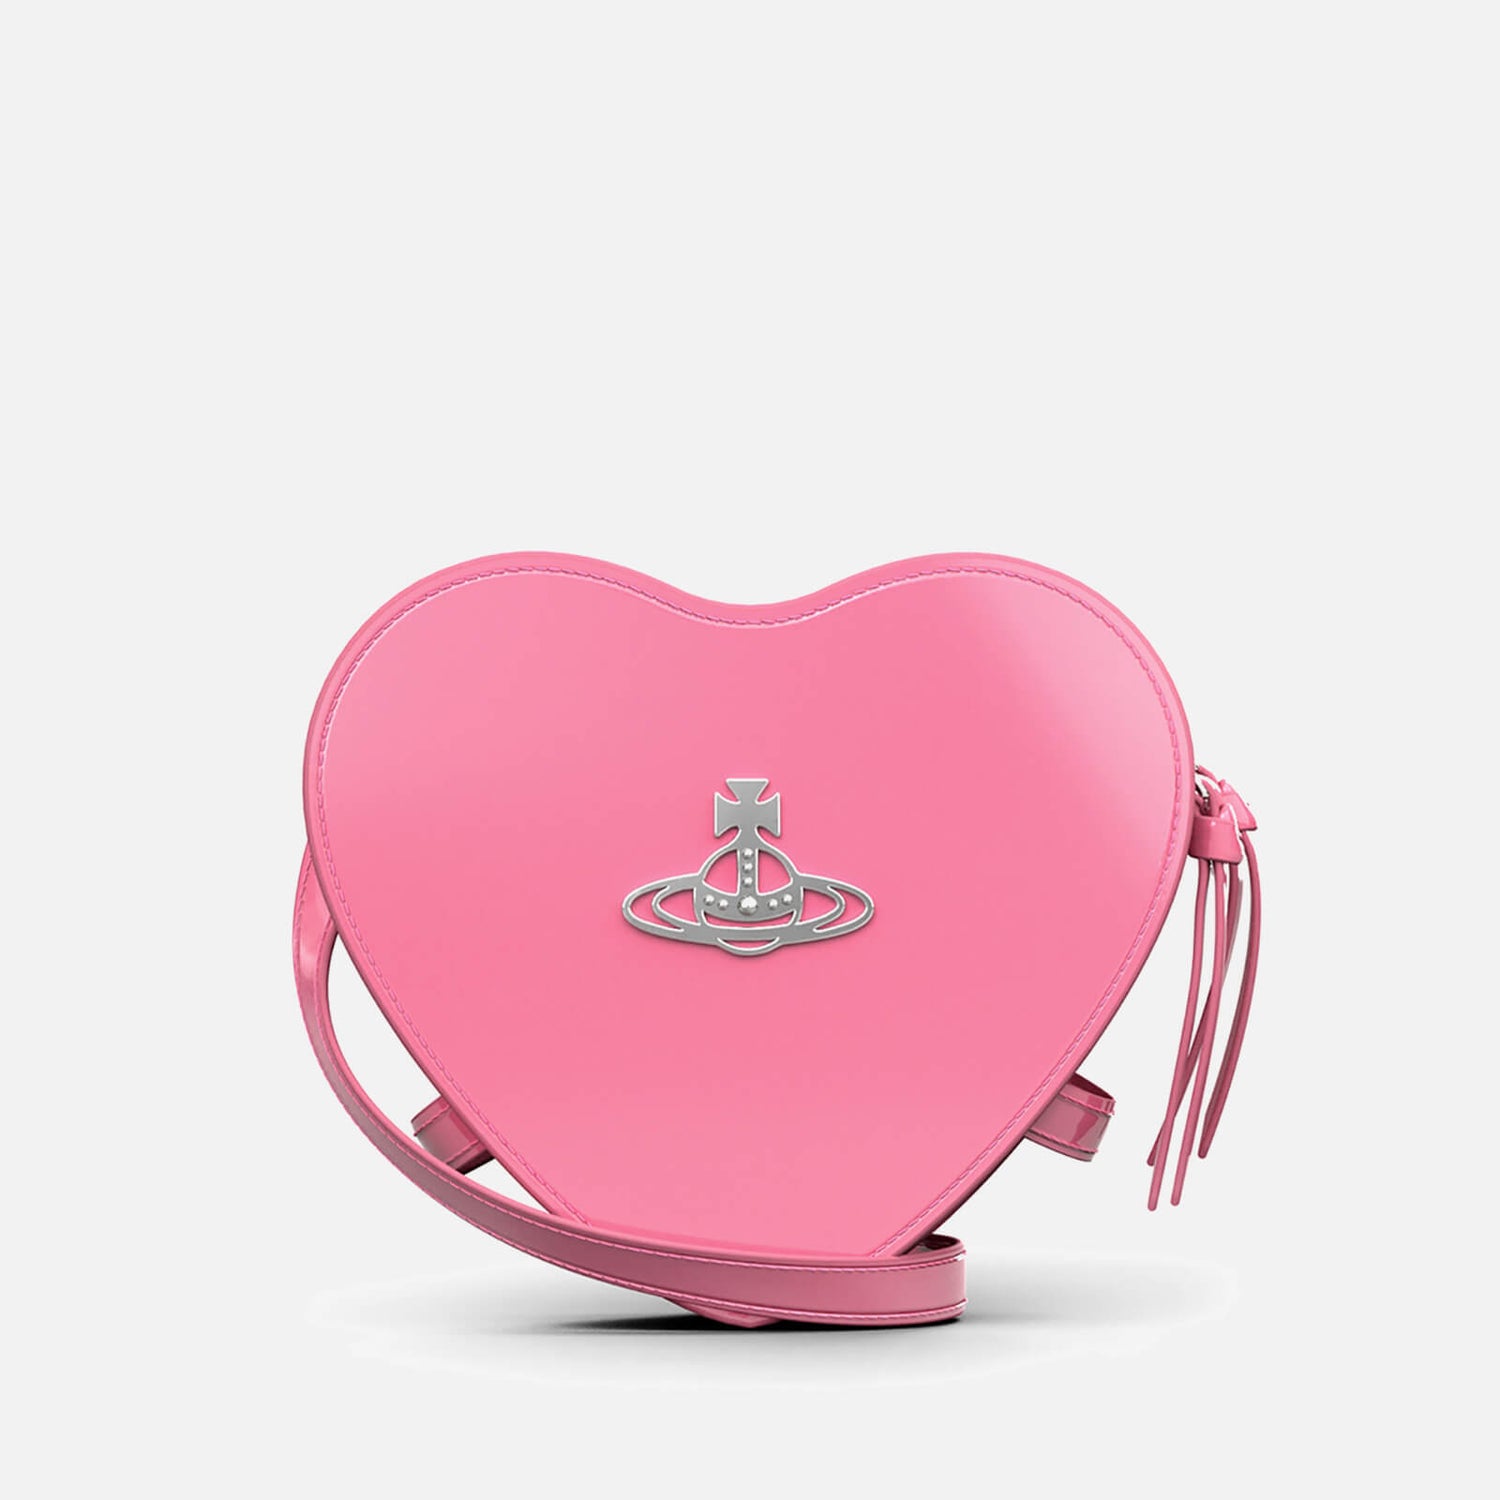 Vivienne Westwood Louise Heart Patent Leather Crossbody Bag